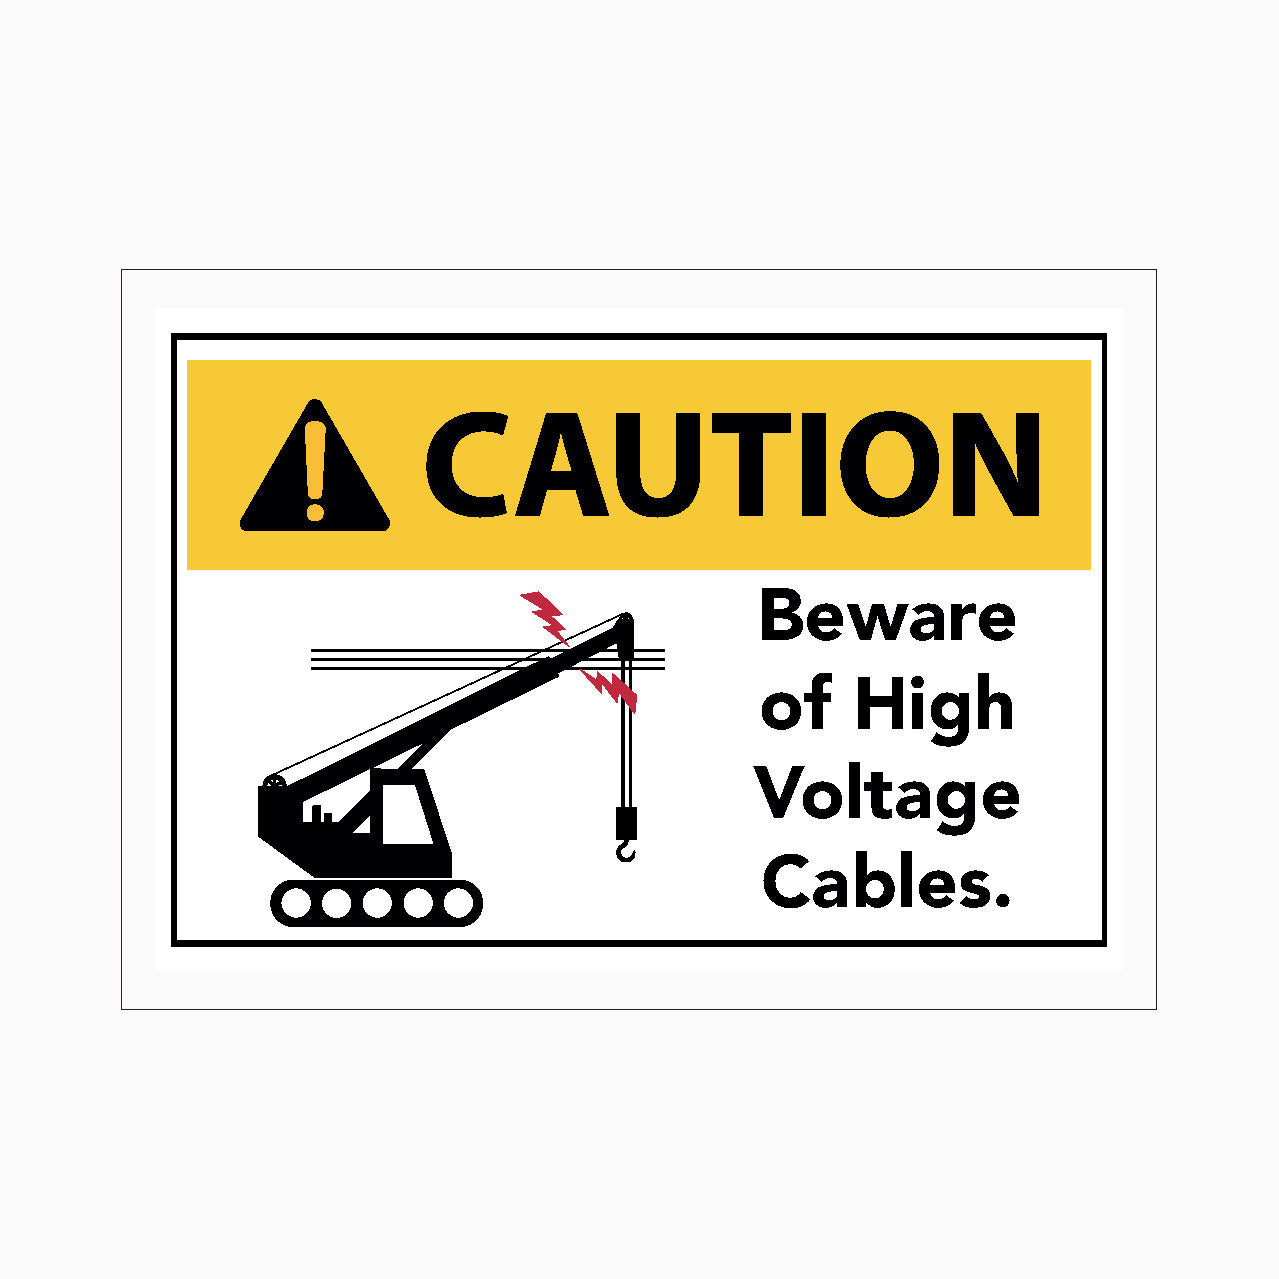 BEWARE OF HIGH VOLTAGE CABLES SIGN -CAUTION SIGN